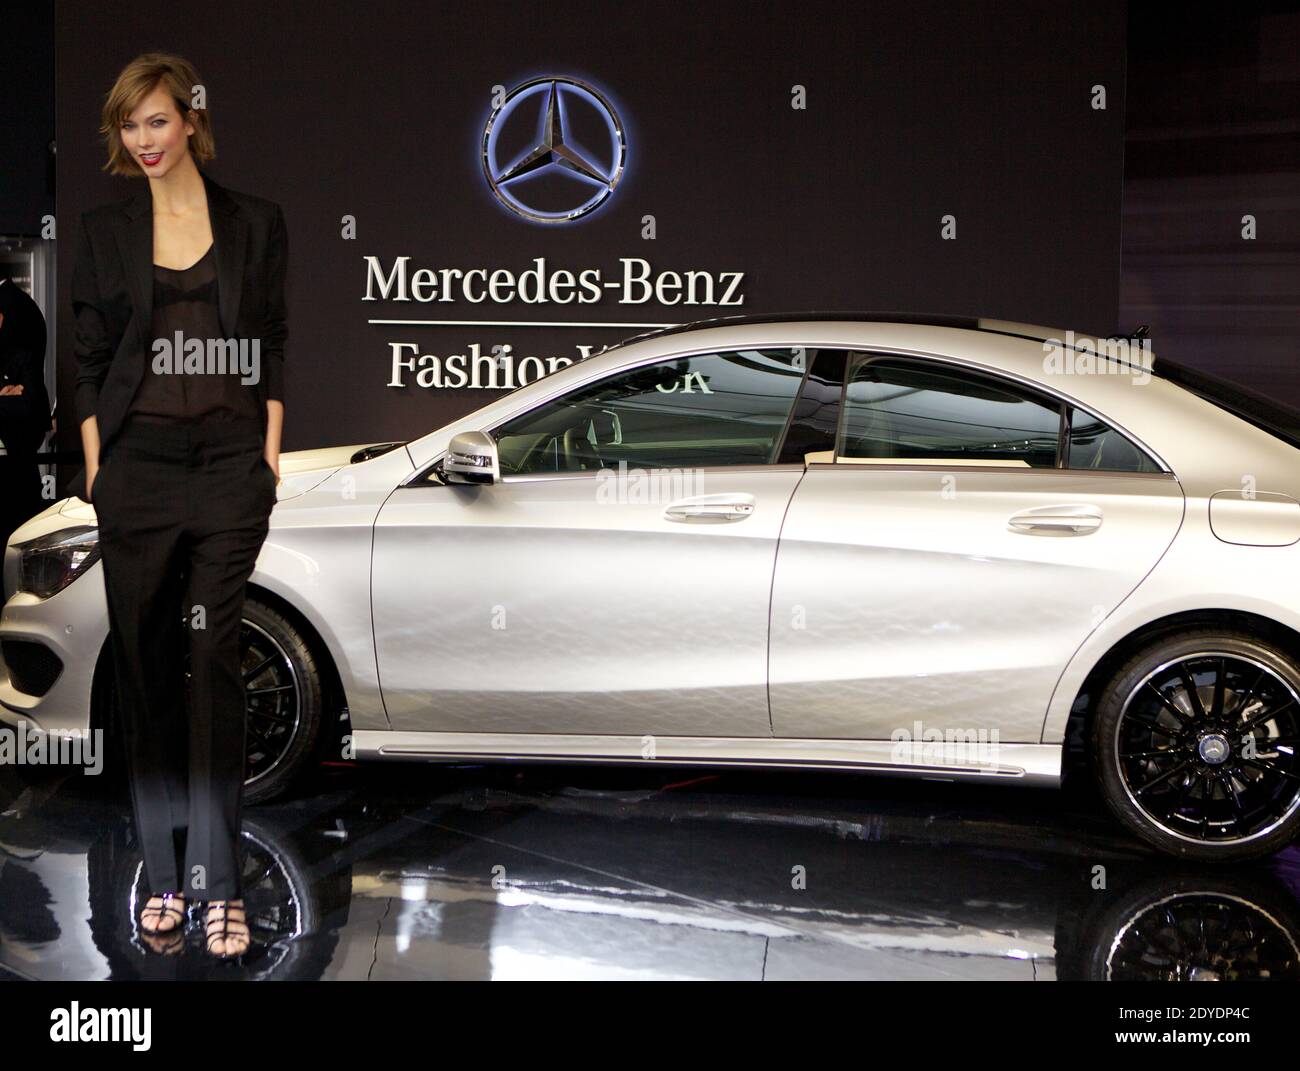 Model Karlie Kloss And Photographer Ryan Mcginley Unveil The Fall 2013 Mercedes Benz Fashion